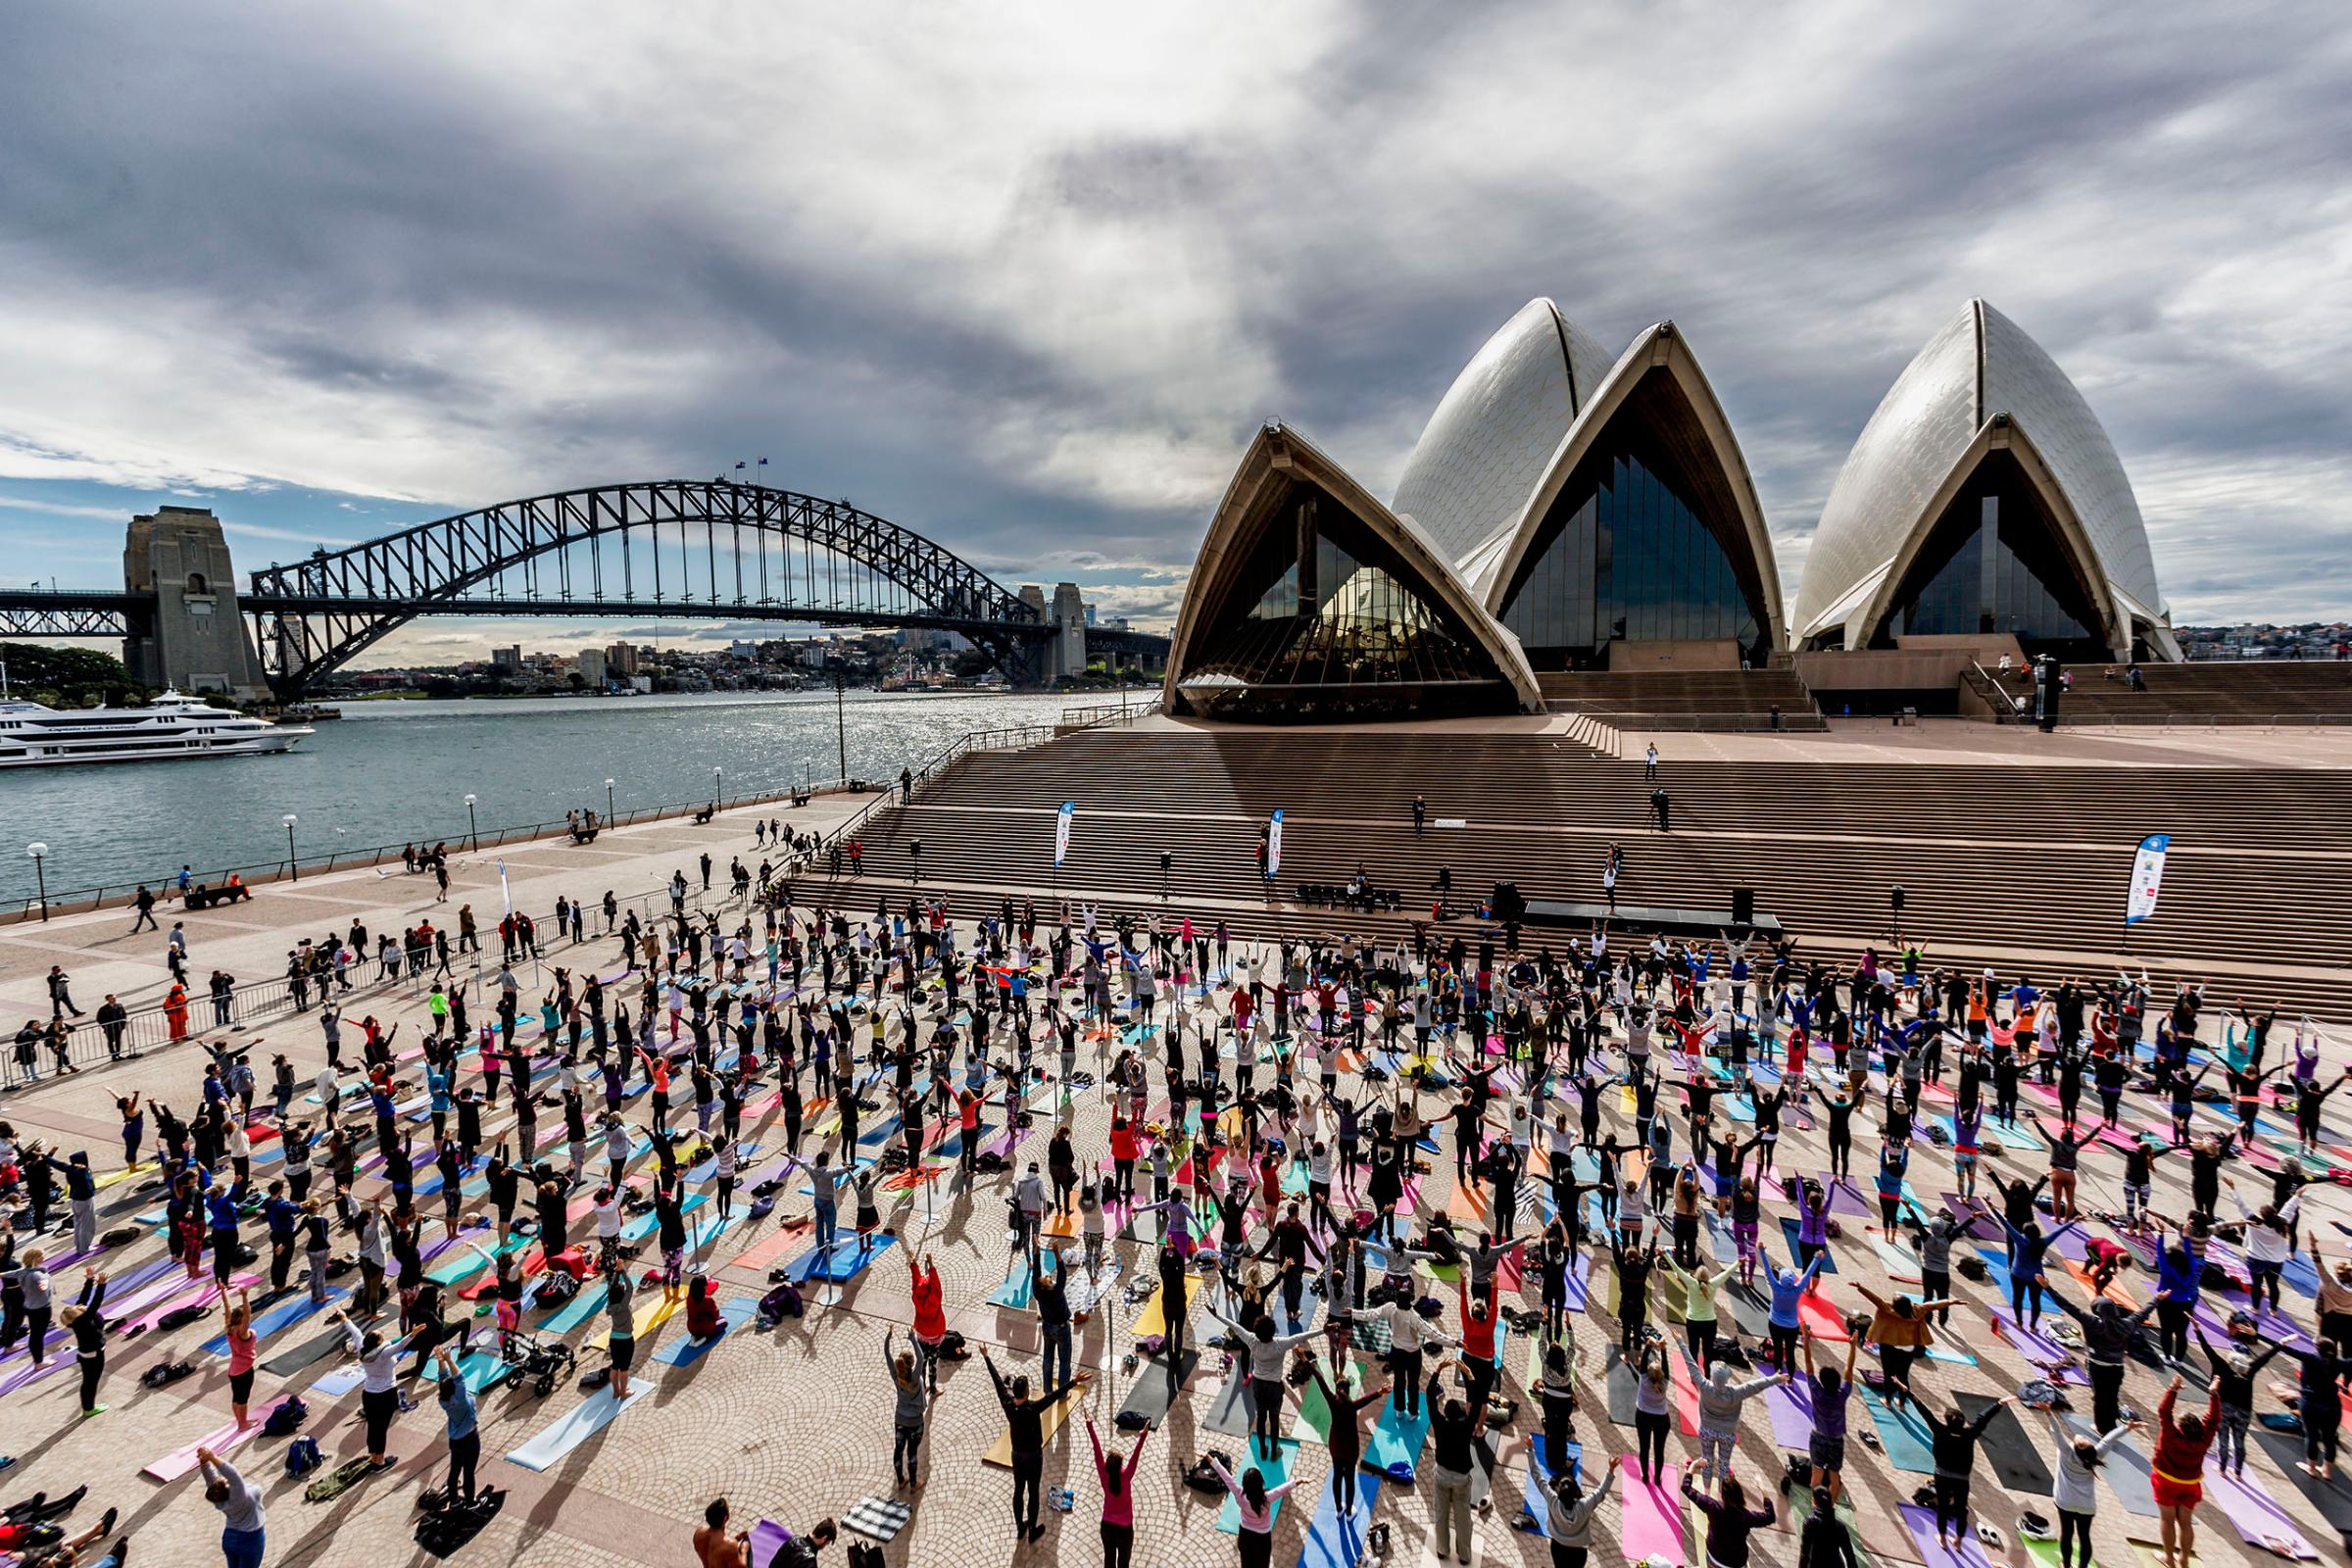 Thousands gather for a group yoga class in front of the Sydney Opera House in Sydney, Australia, on June 21, 2016.